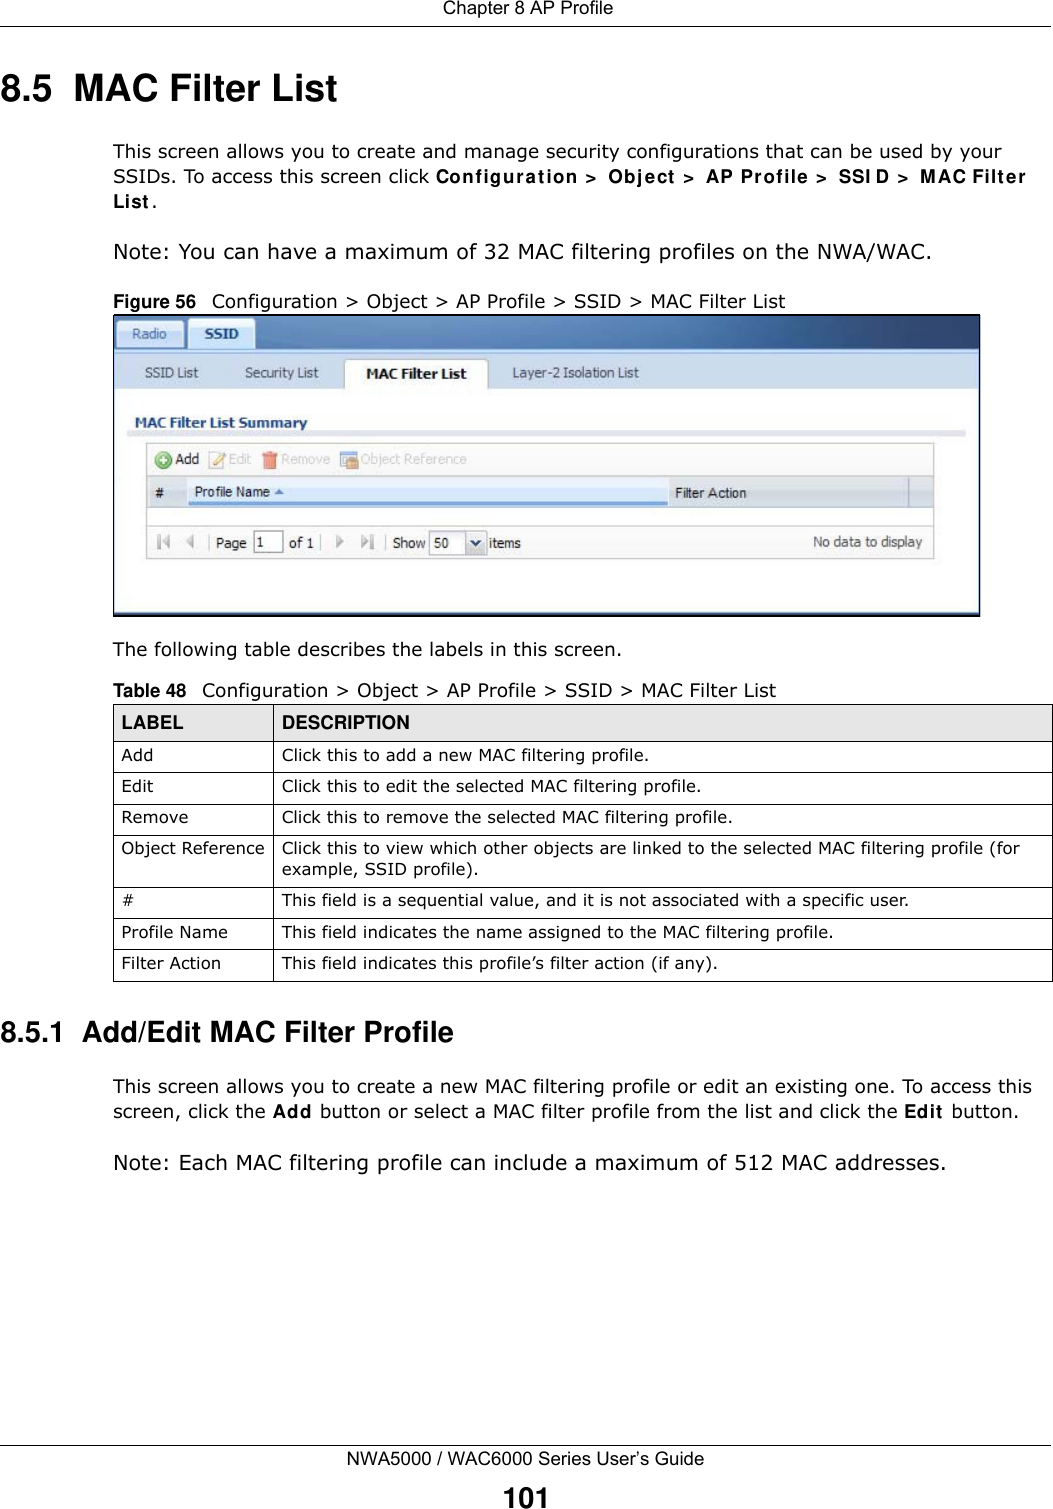  Chapter 8 AP ProfileNWA5000 / WAC6000 Series User’s Guide1018.5  MAC Filter ListThis screen allows you to create and manage security configurations that can be used by your SSIDs. To access this screen click Configuration &gt; Object &gt; AP Profile &gt; SSID &gt; MAC Filter List.Note: You can have a maximum of 32 MAC filtering profiles on the NWA/WAC.Figure 56   Configuration &gt; Object &gt; AP Profile &gt; SSID &gt; MAC Filter ListThe following table describes the labels in this screen.  8.5.1  Add/Edit MAC Filter ProfileThis screen allows you to create a new MAC filtering profile or edit an existing one. To access this screen, click the Add button or select a MAC filter profile from the list and click the Edit button.Note: Each MAC filtering profile can include a maximum of 512 MAC addresses.Table 48   Configuration &gt; Object &gt; AP Profile &gt; SSID &gt; MAC Filter ListLABEL DESCRIPTIONAdd Click this to add a new MAC filtering profile.Edit Click this to edit the selected MAC filtering profile.Remove Click this to remove the selected MAC filtering profile.Object Reference Click this to view which other objects are linked to the selected MAC filtering profile (for example, SSID profile).# This field is a sequential value, and it is not associated with a specific user.Profile Name This field indicates the name assigned to the MAC filtering profile.Filter Action This field indicates this profile’s filter action (if any).